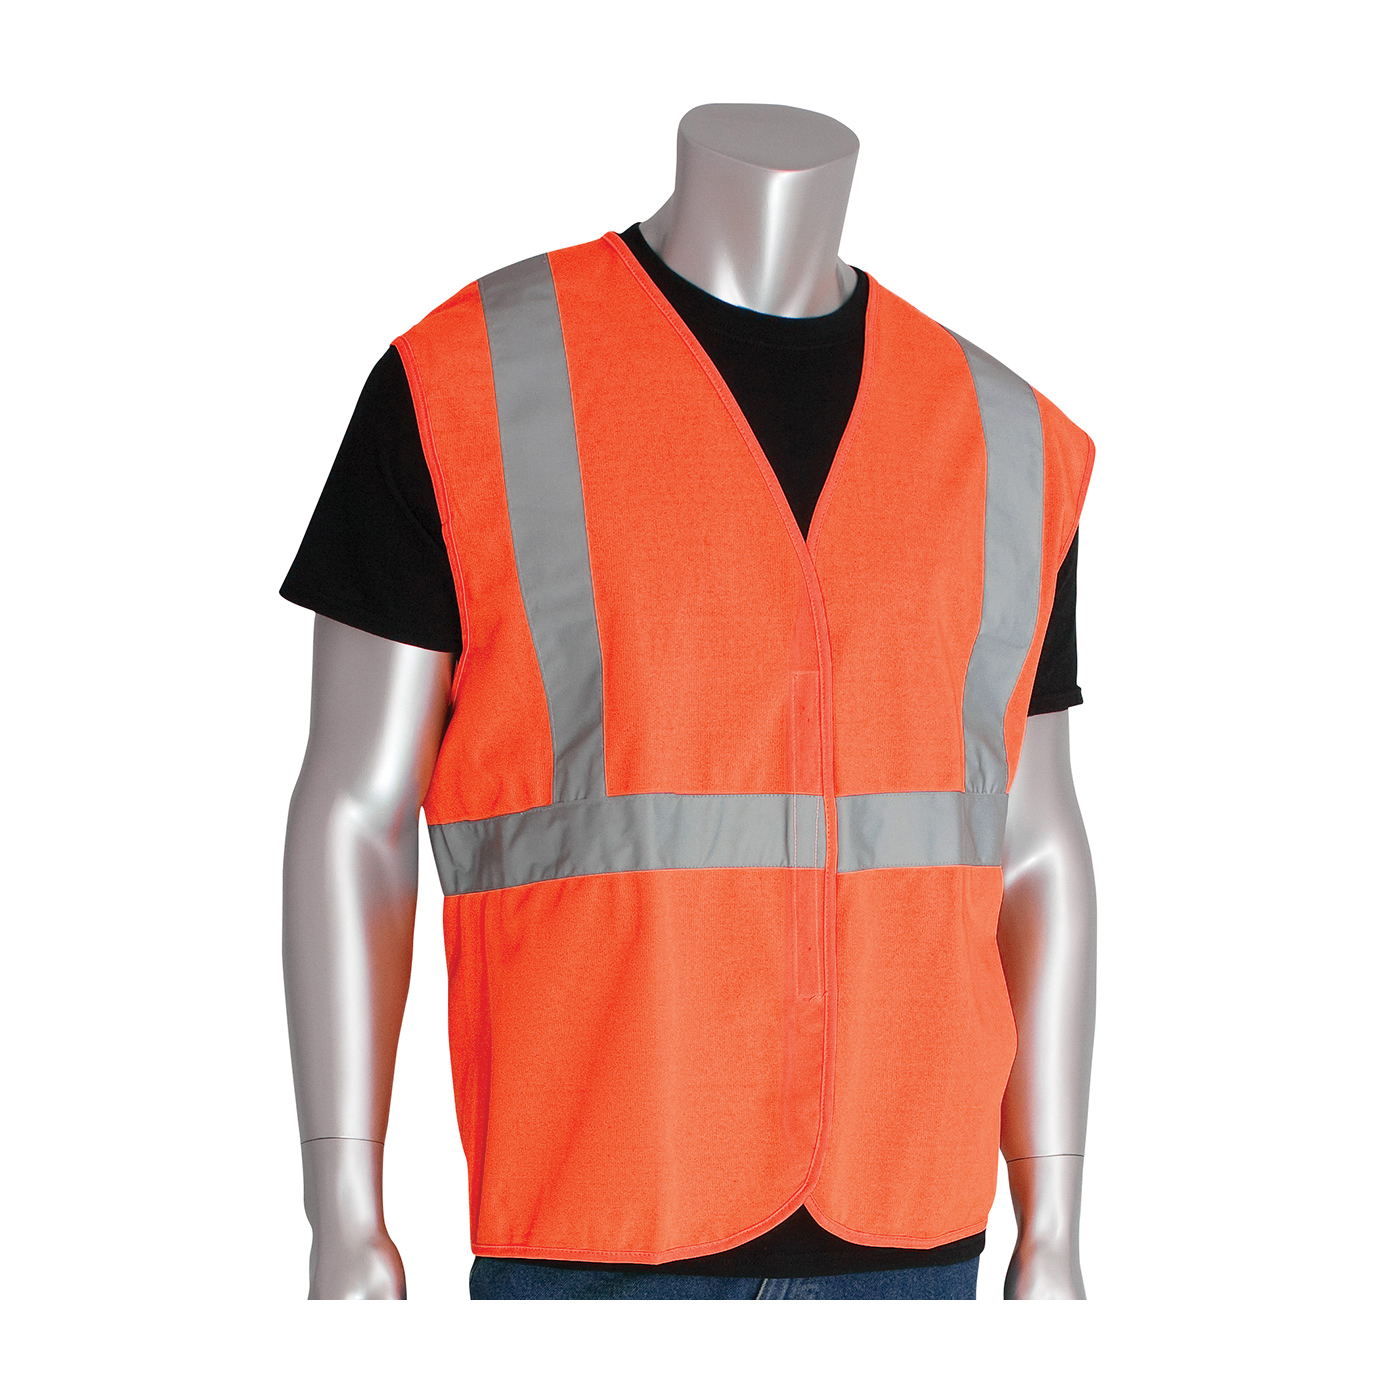 PIP® 302-WCENGOR-XL Solid Vest, XL, Hi-Viz Orange, Polyester, Hook and Loop Closure, ANSI Class: Class 2, Specifications Met: ANSI 107 Type R